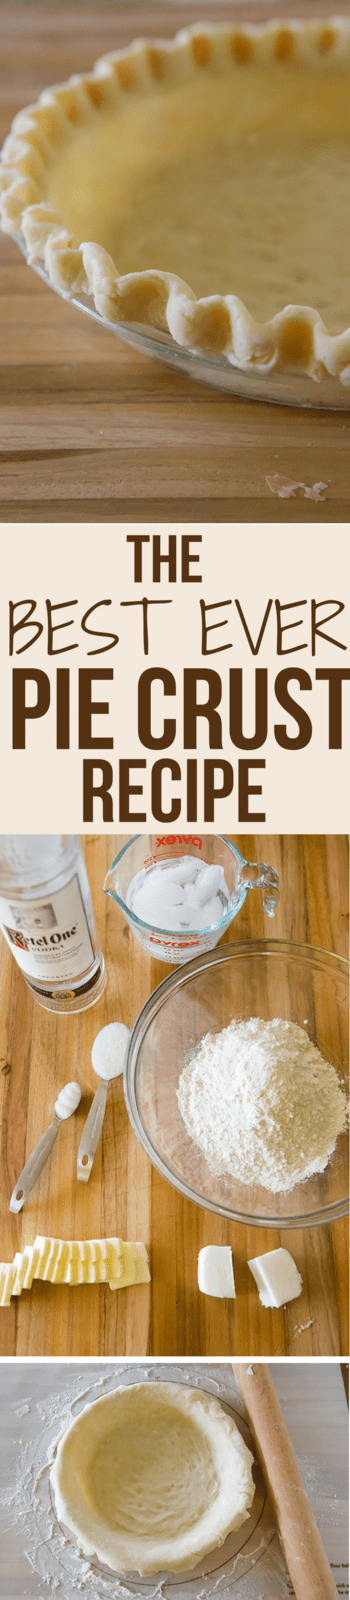 The BEST pie crust recipe you'll ever find! It's easy to work with, tender and flaky. You won't believe the secret ingredient!